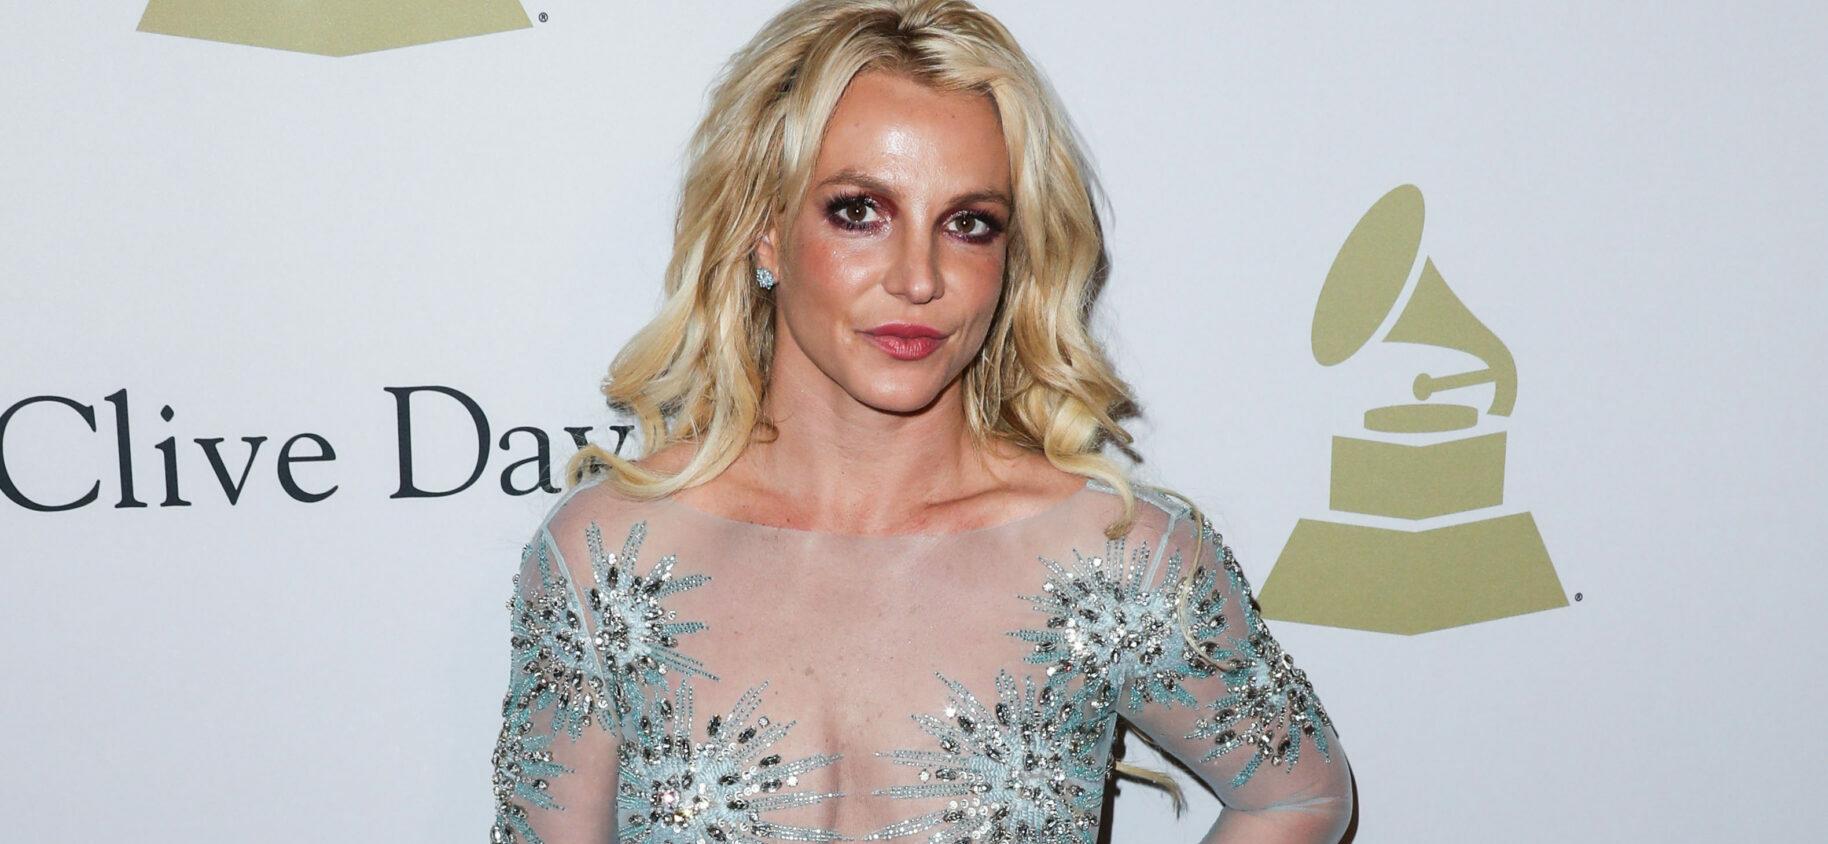 Britney Spears: Check Out How Much Weight I’ve Lost!